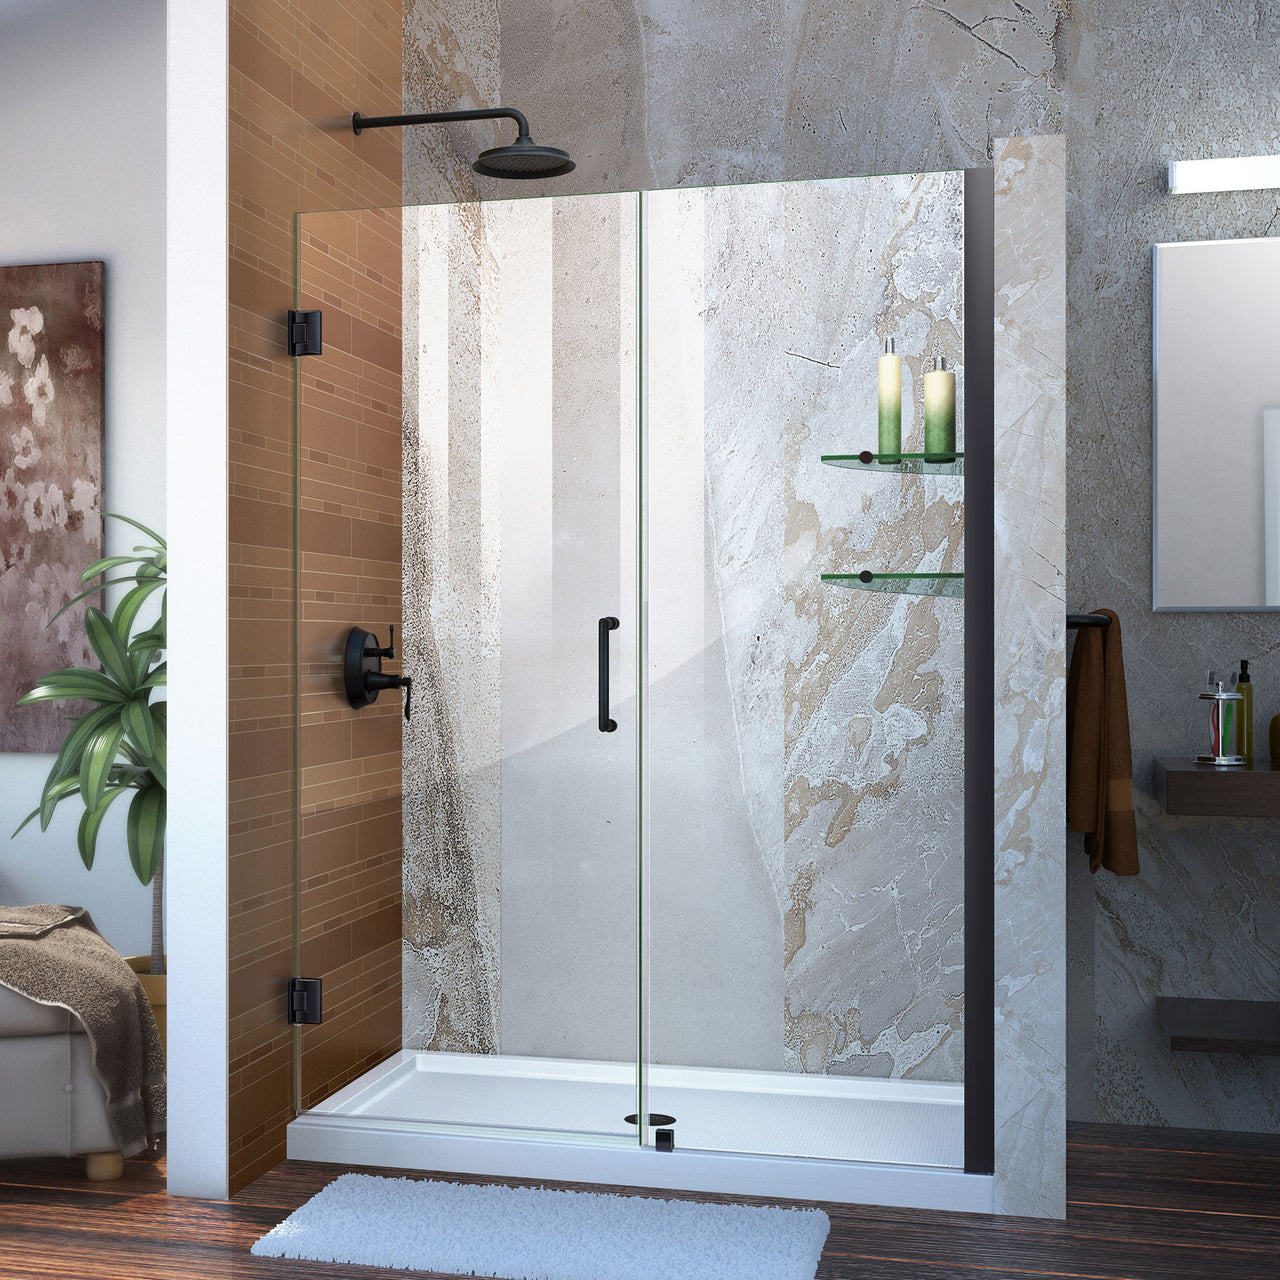 DreamLine Unidoor 51-52 in. W x 72 in. H Frameless Hinged Shower Door with Shelves, Clear Glass - BNGBath